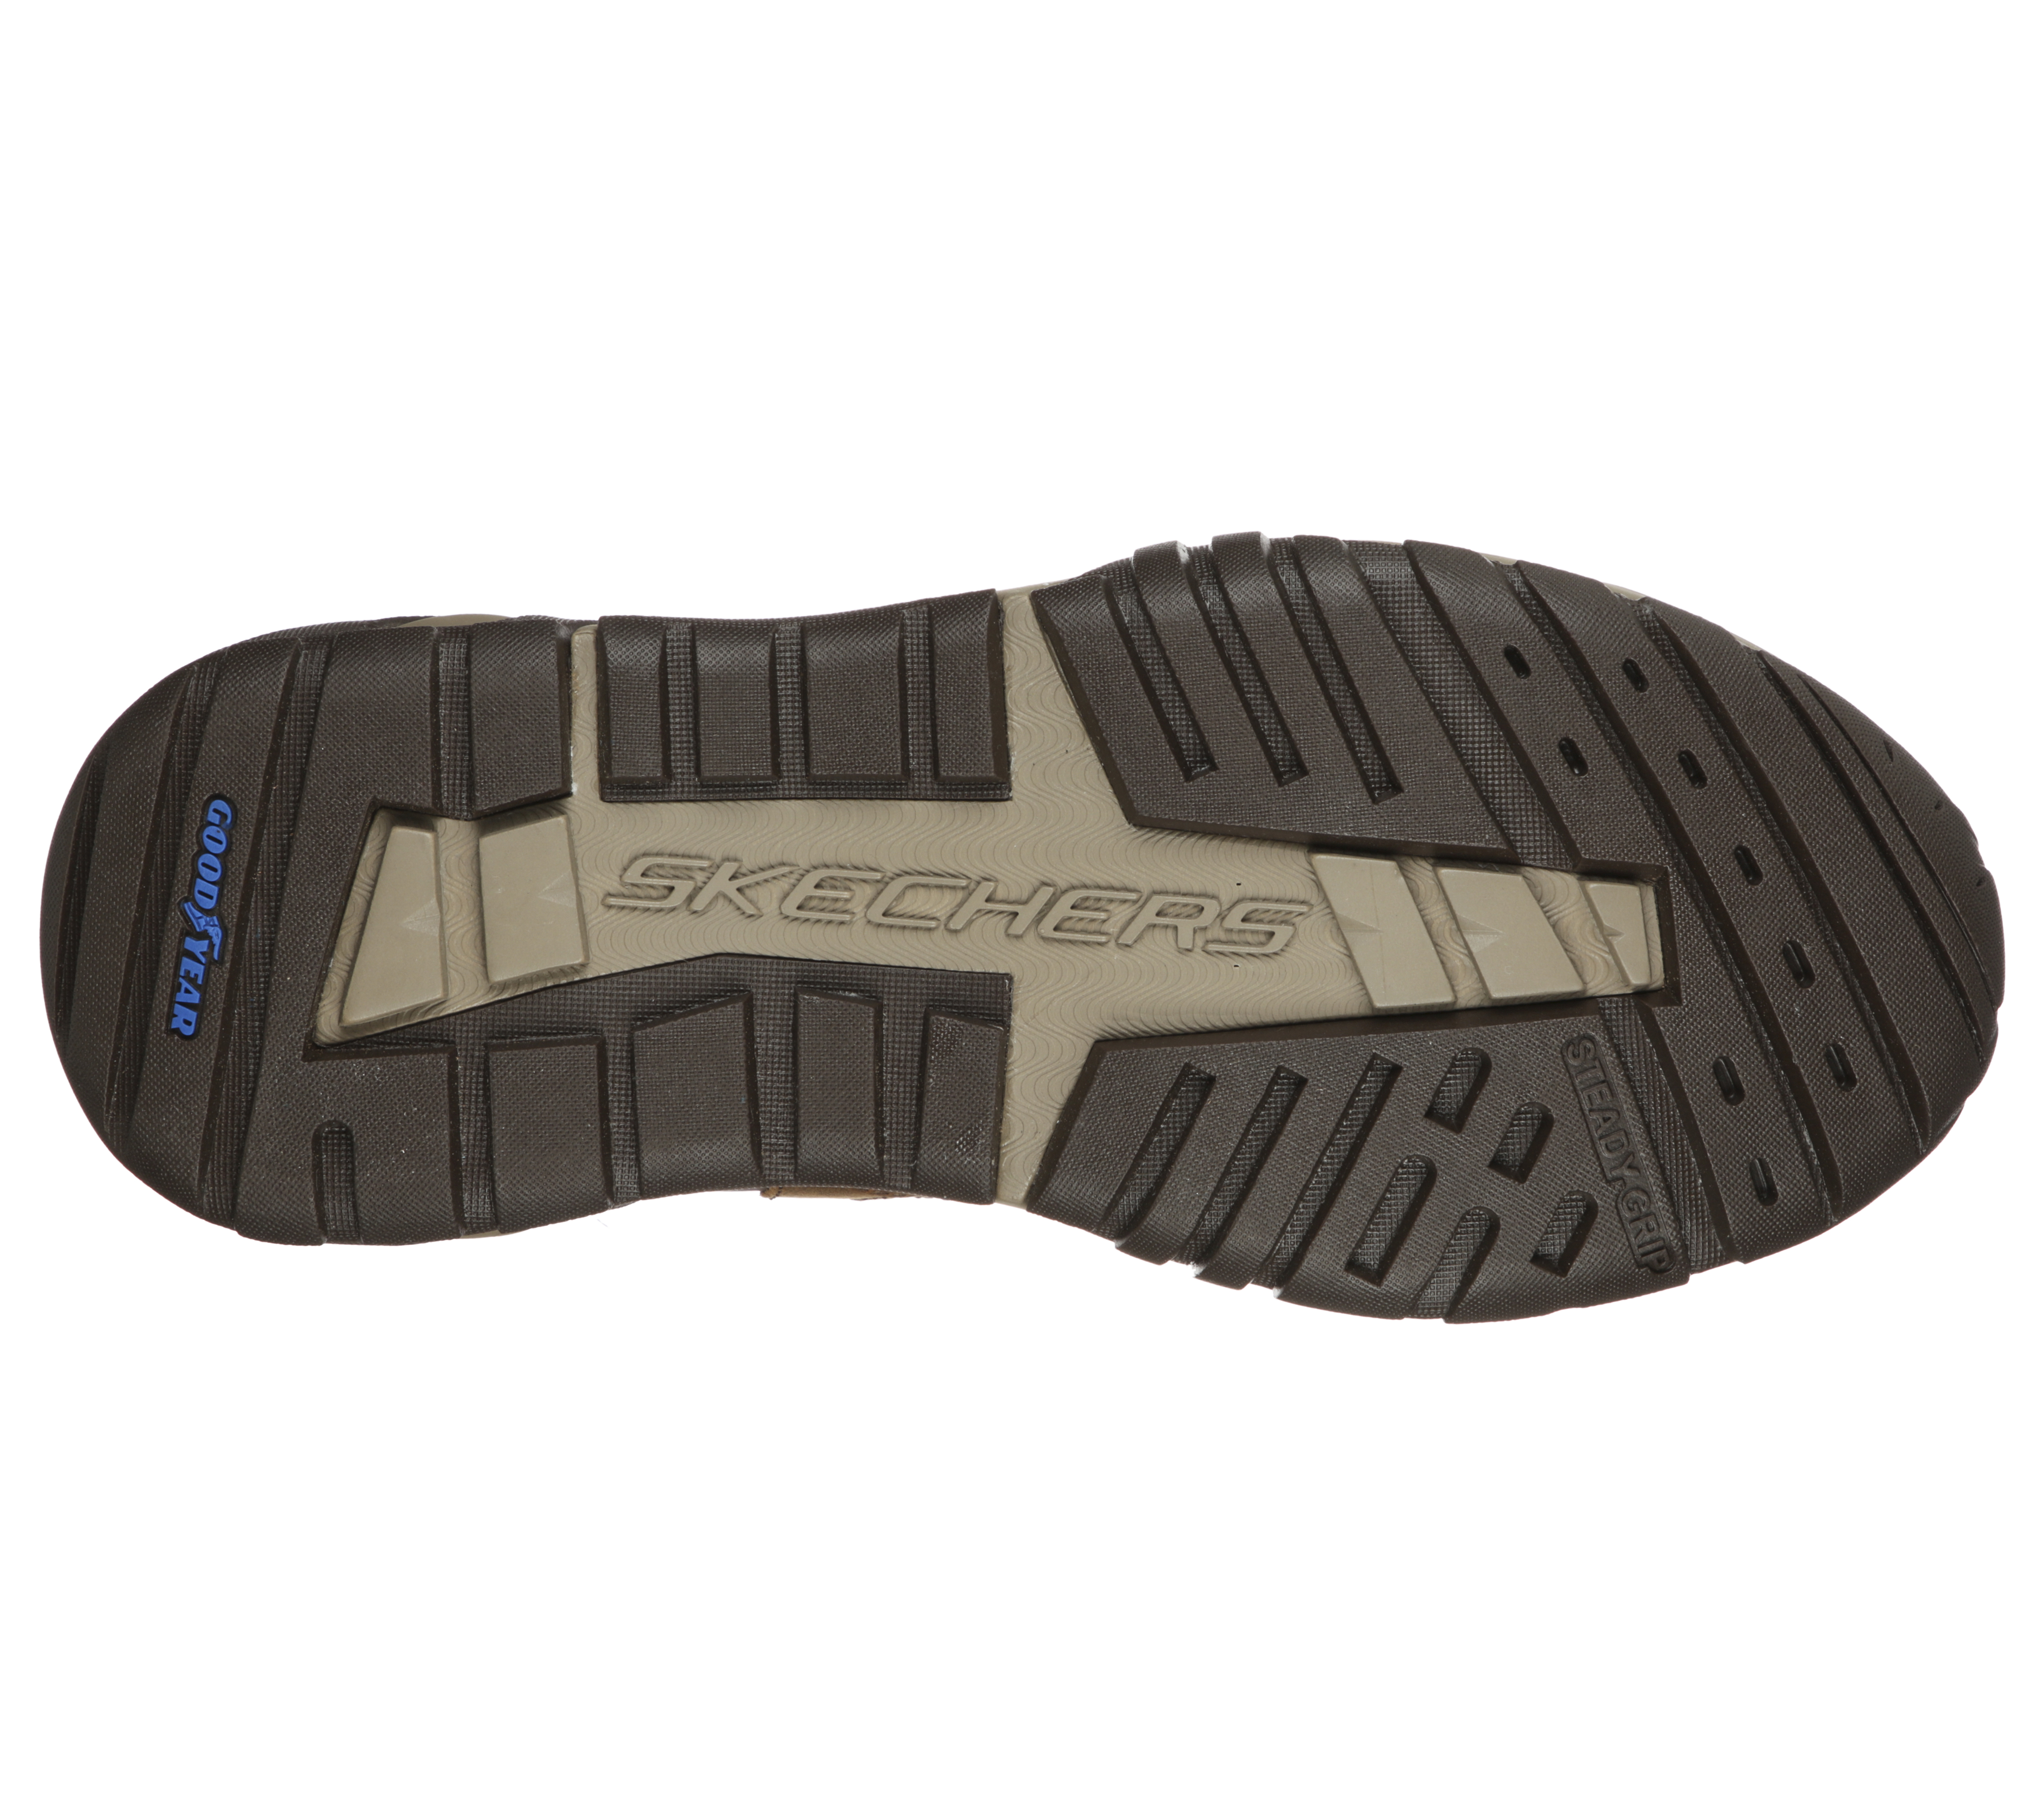 Relaxed Fit: Skechers Arch Fit Recon - Percival